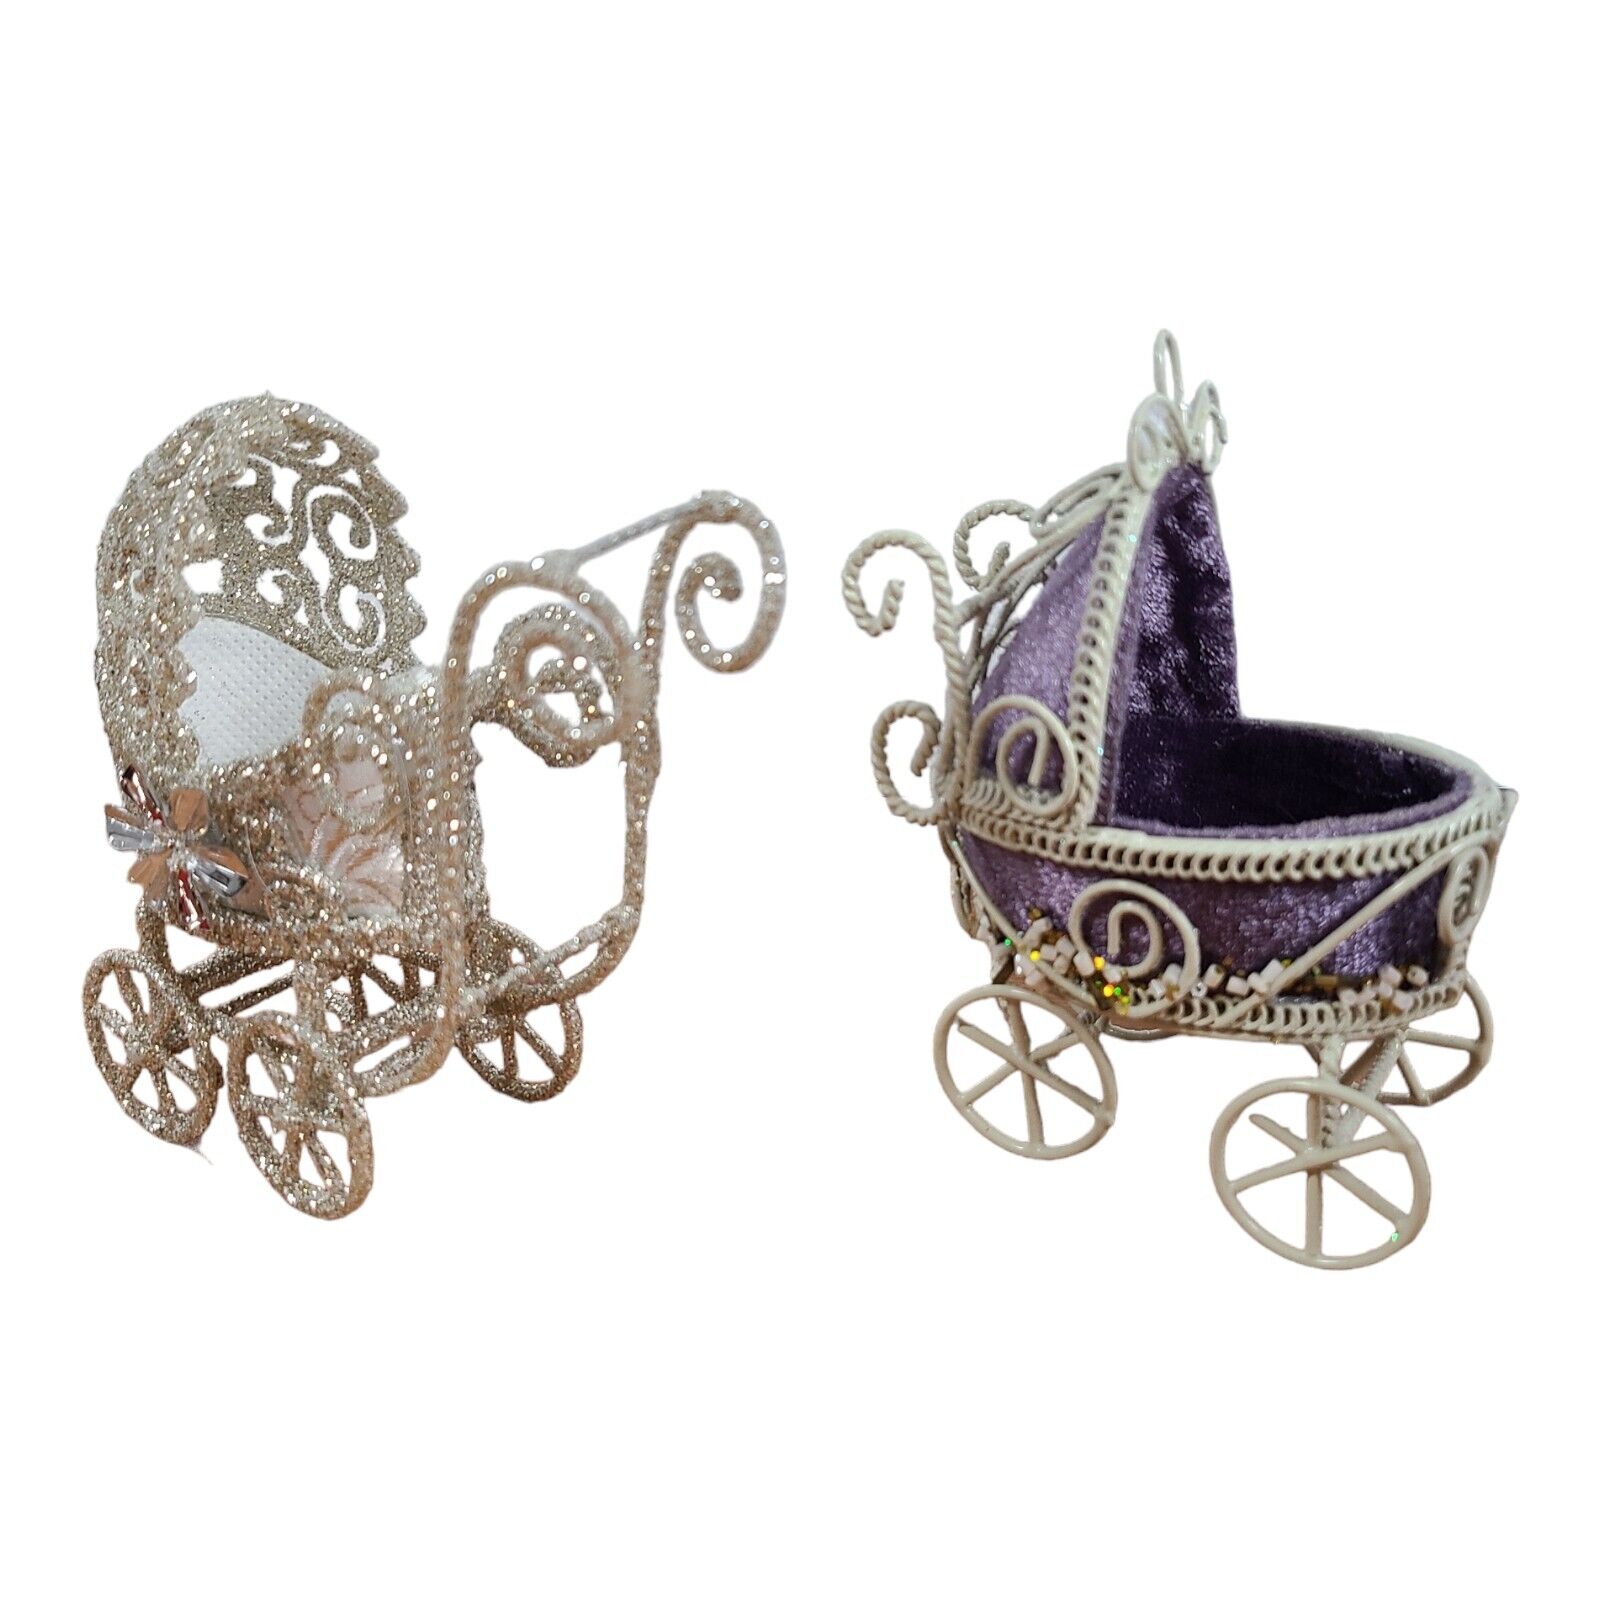 Two Victorian Baby Carriages Christmas Ornaments